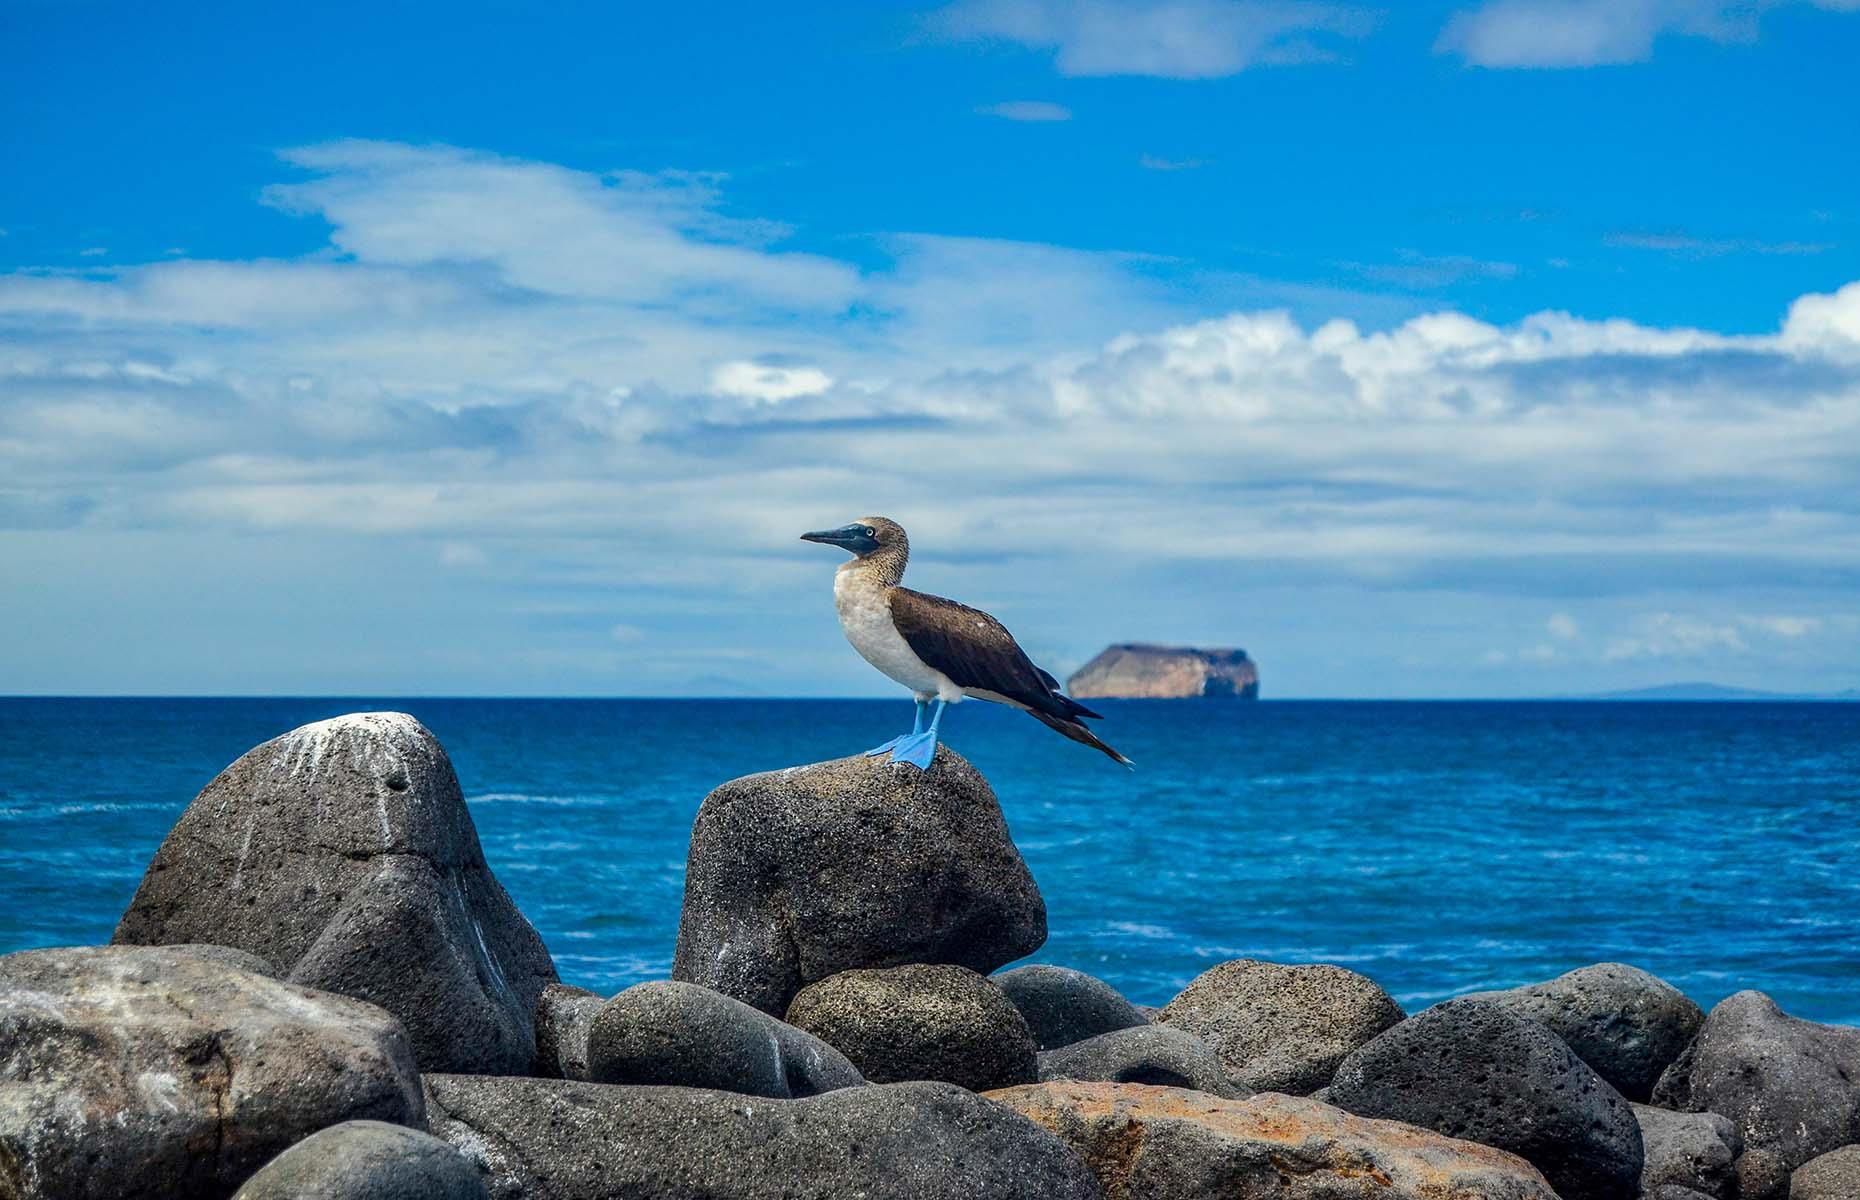 <p>The Galápagos is an isolated group of islands 605 miles (974km) off the west coast of Ecuador. Famous for being the place that inspired naturalist Charles Darwin’s work <em>On the Origin of the Species</em>, the diversity of wildlife here is mind-blowing. The Galápagos is home to over 300 different reptile species and birds such as the blue-footed booby, with 50% of the world’s breeding pairs living here.</p>  <p><strong><a href="https://www.loveexploring.com/galleries/113902/secrets-of-the-worlds-most-special-islands">Discover more secrets of the world's most special islands</a></strong></p>